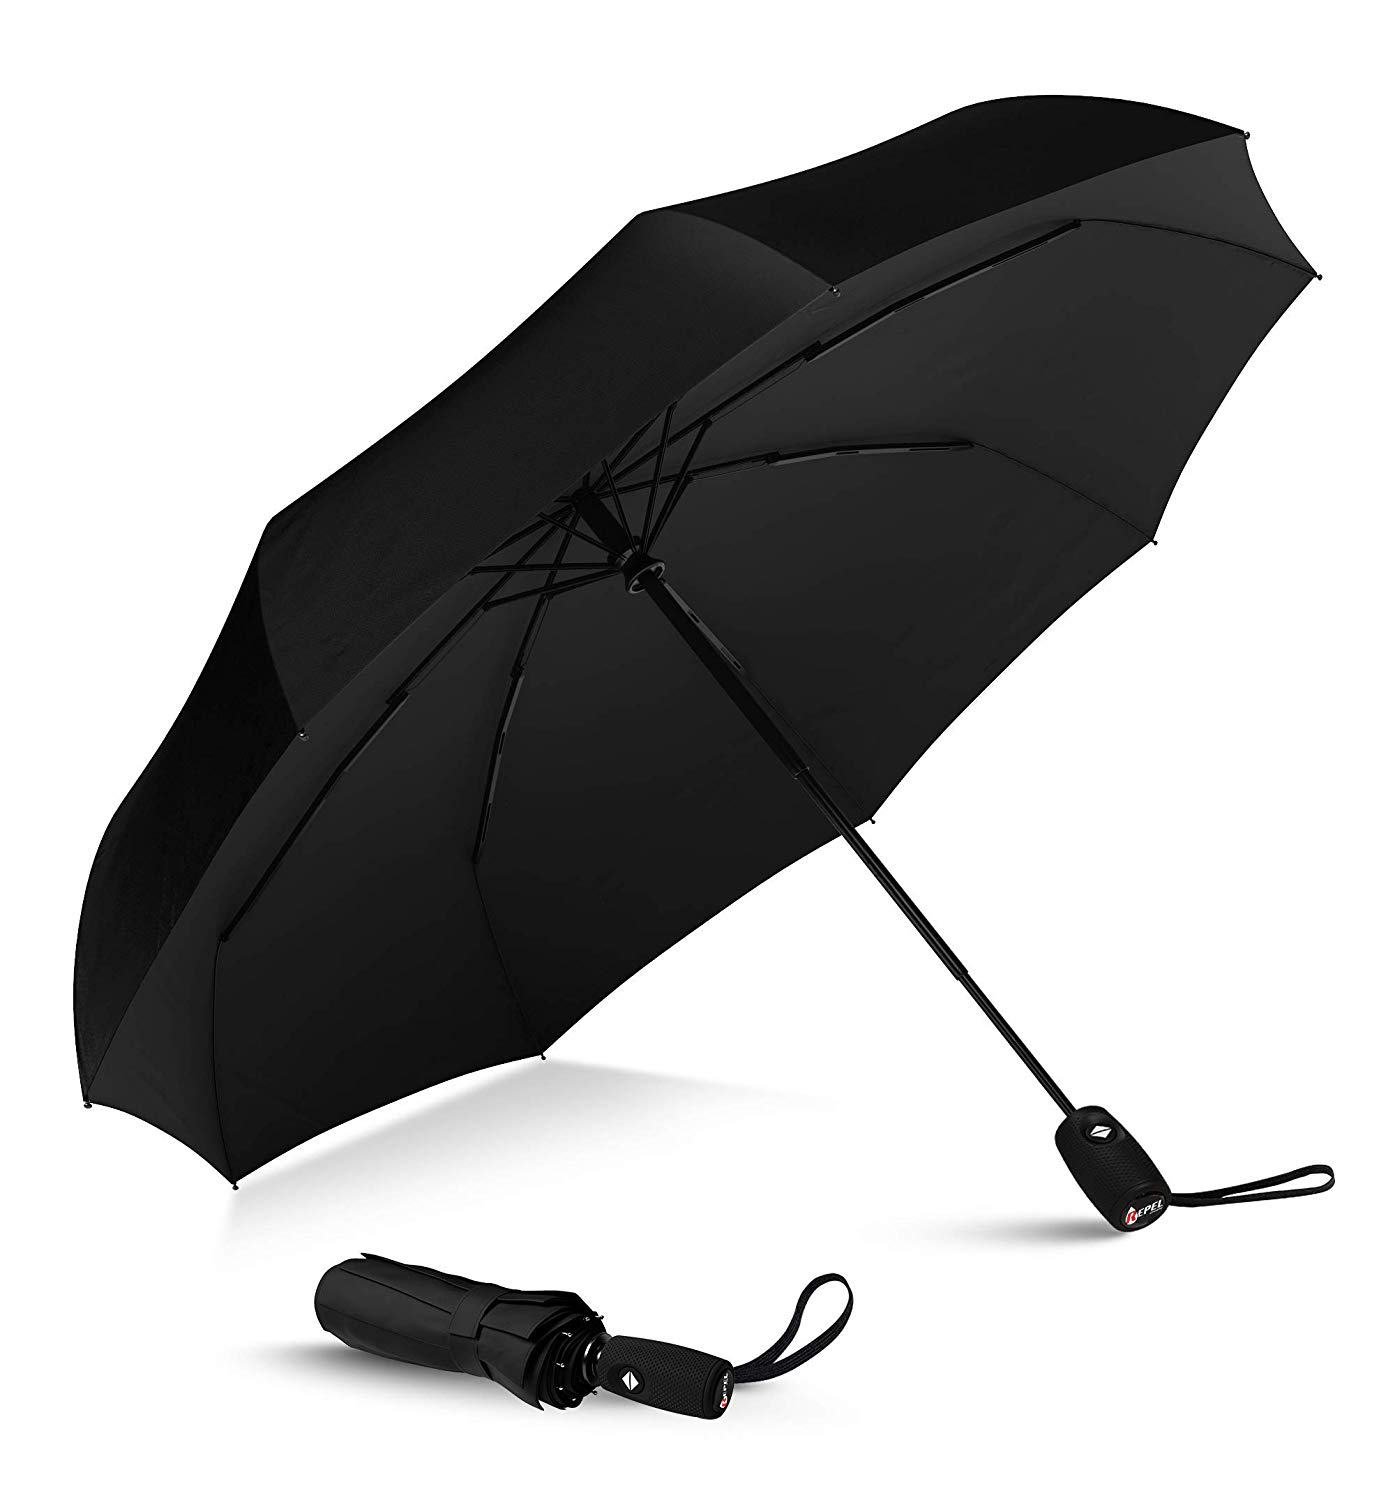 Dark Black Compact Protection from Rain ZOMAKE Travel Umbrella Auto Open Close and Upgraded Comfort Handle 10 Ribs Reinforced Windproof Umbrella with 45 Teflon Coating Canopy